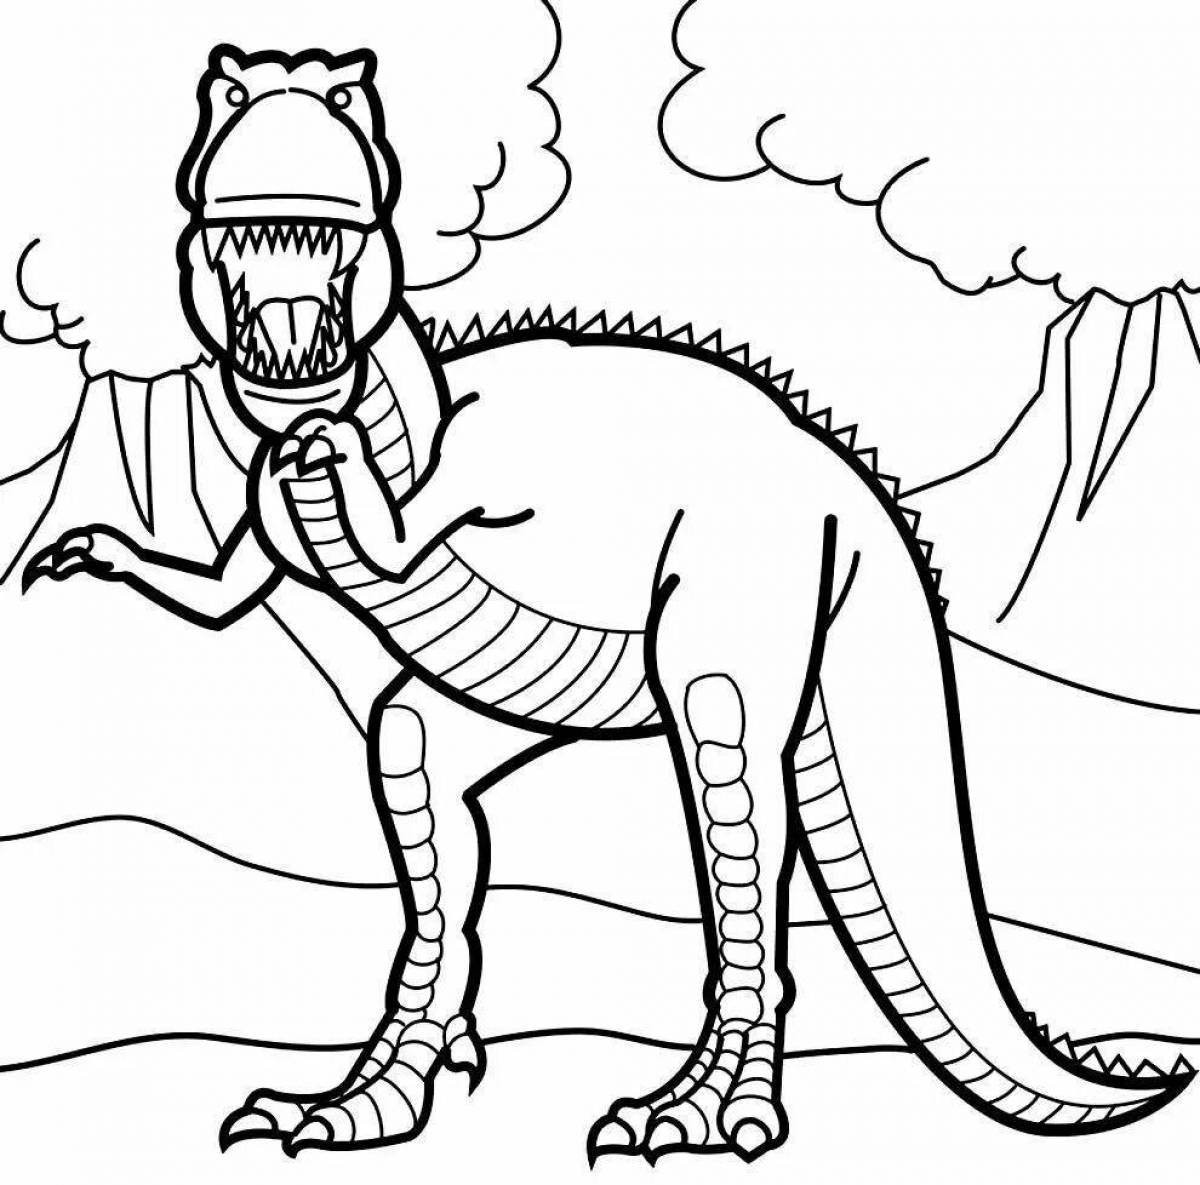 Tyrannosaurus rex magnificent seal coloring page